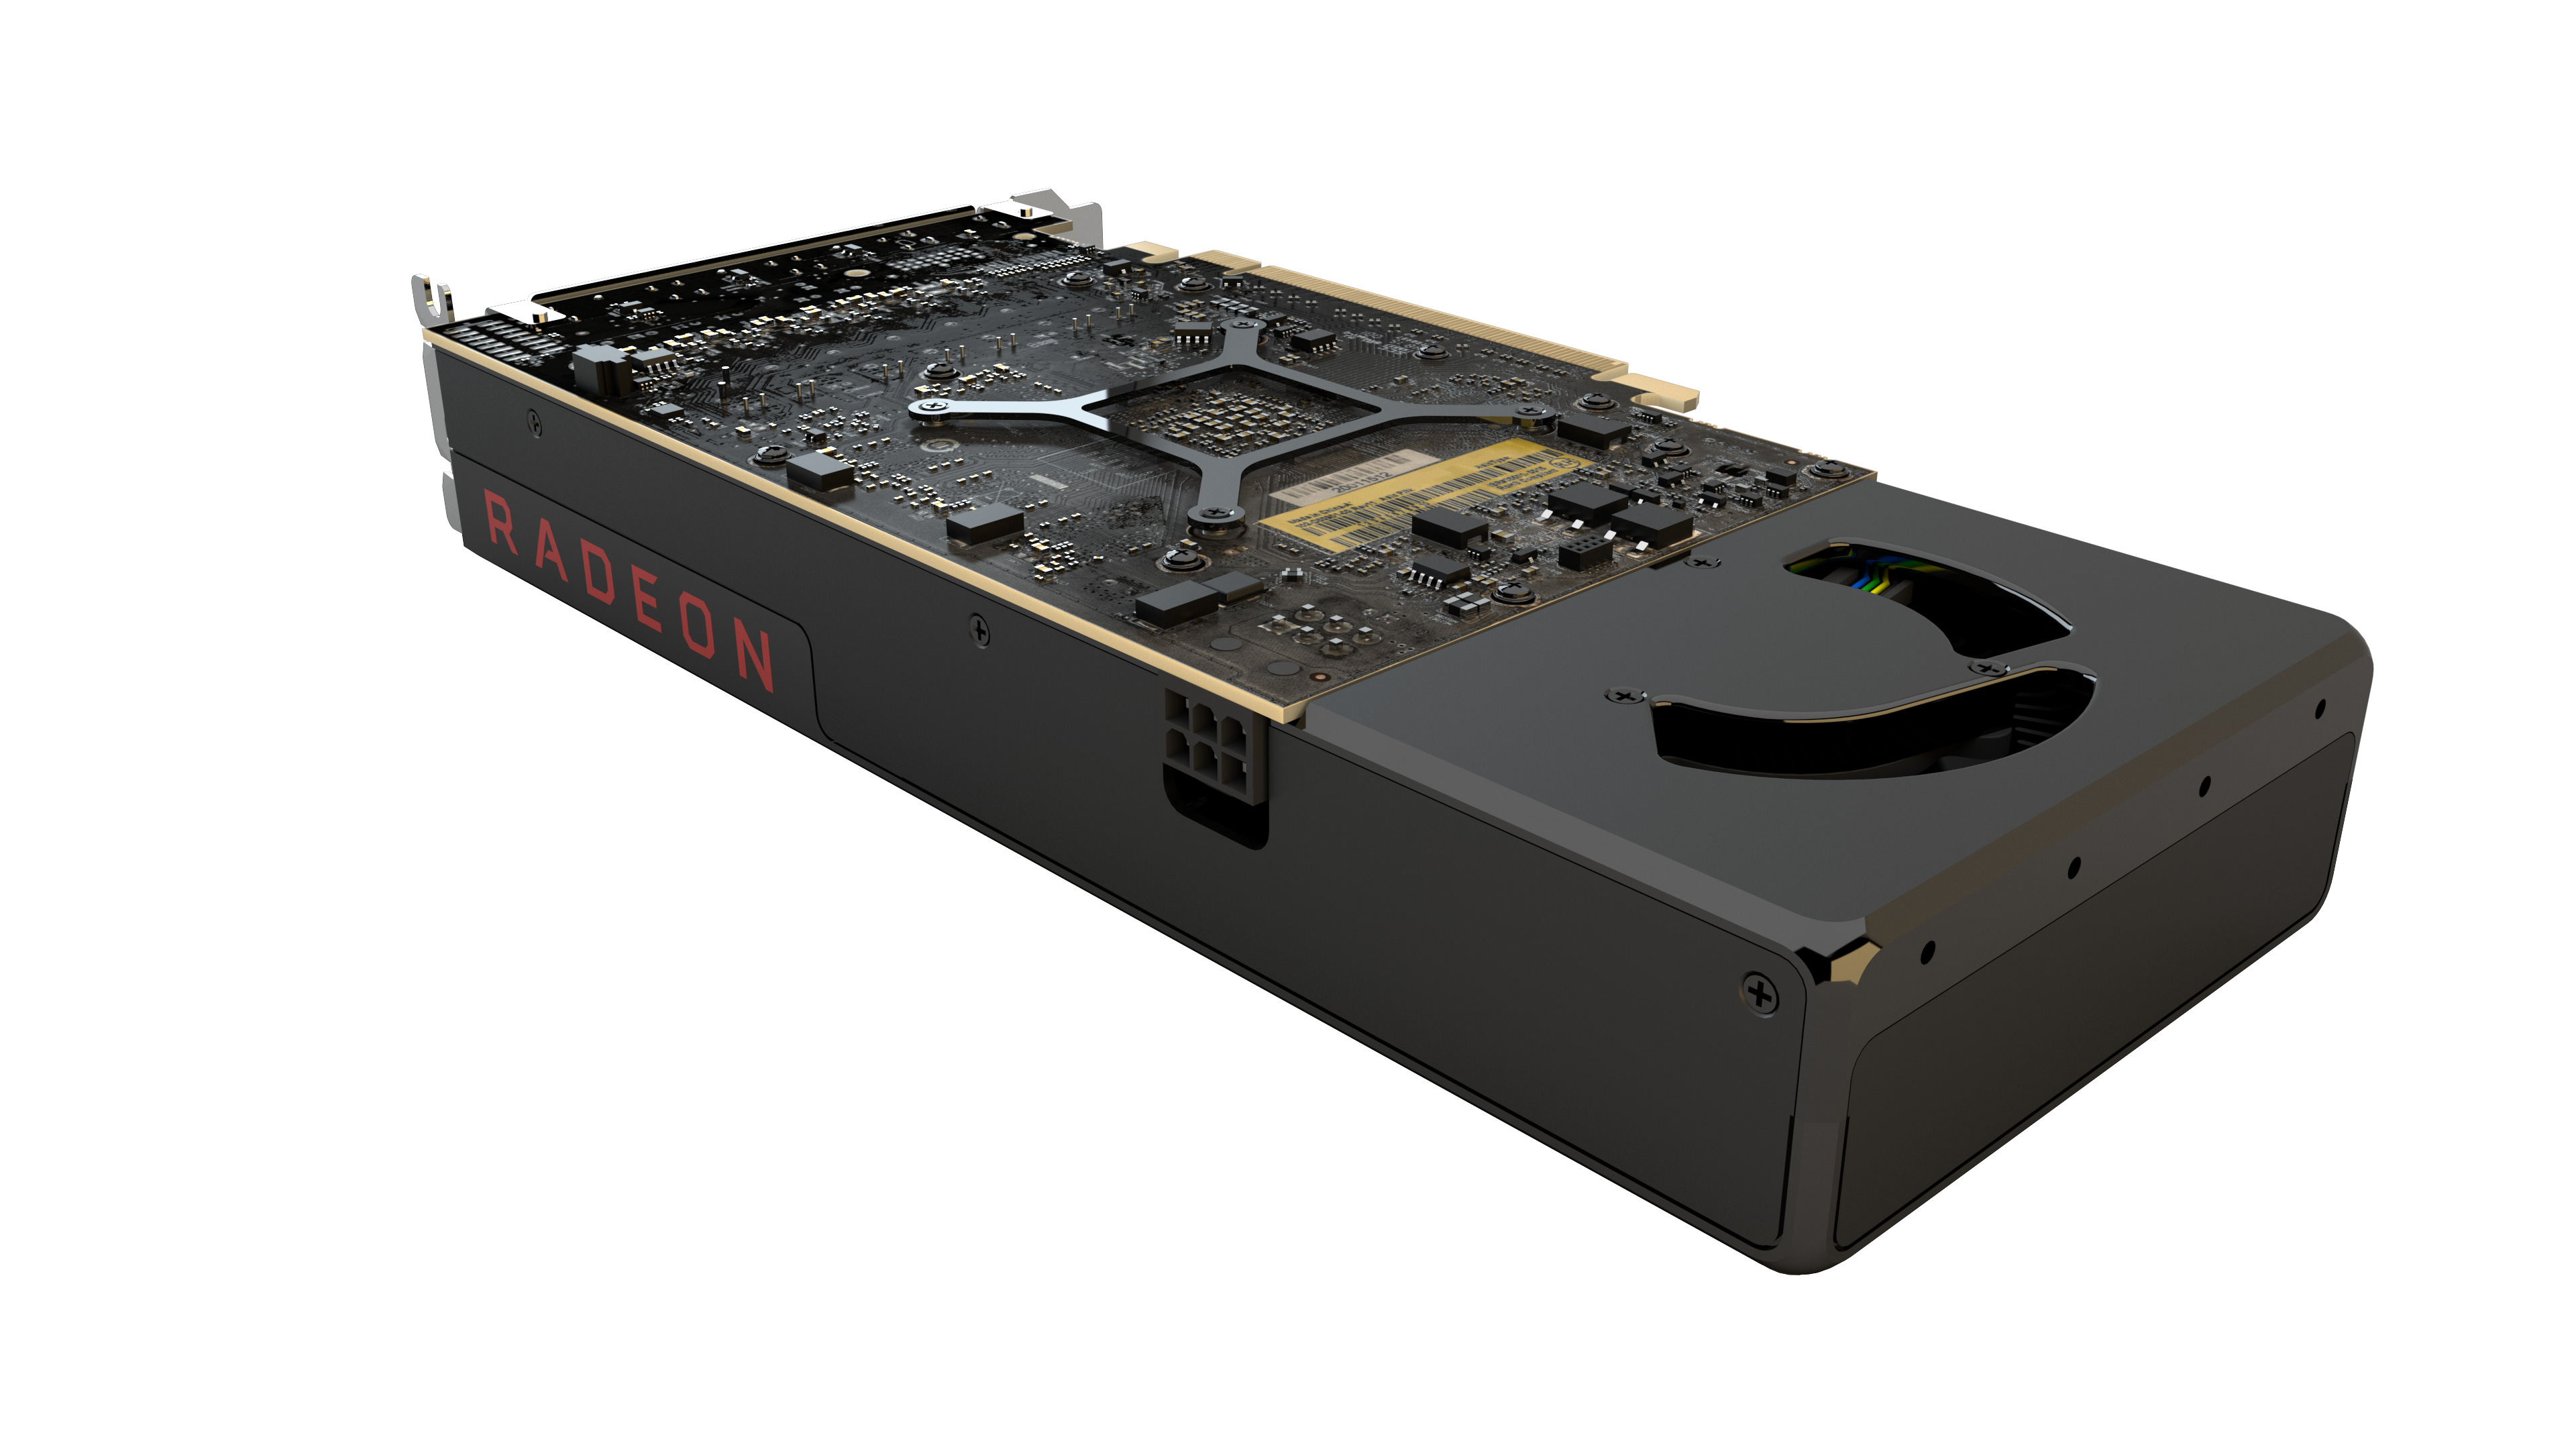 Media asset in full size related to 3dfxzone.it news item entitled as follows: AMD annuncia la disponibilit commerciale della Radeon RX 480 8GB | Image Name: news24512_AMD-Radeon-RX-480_2.jpg